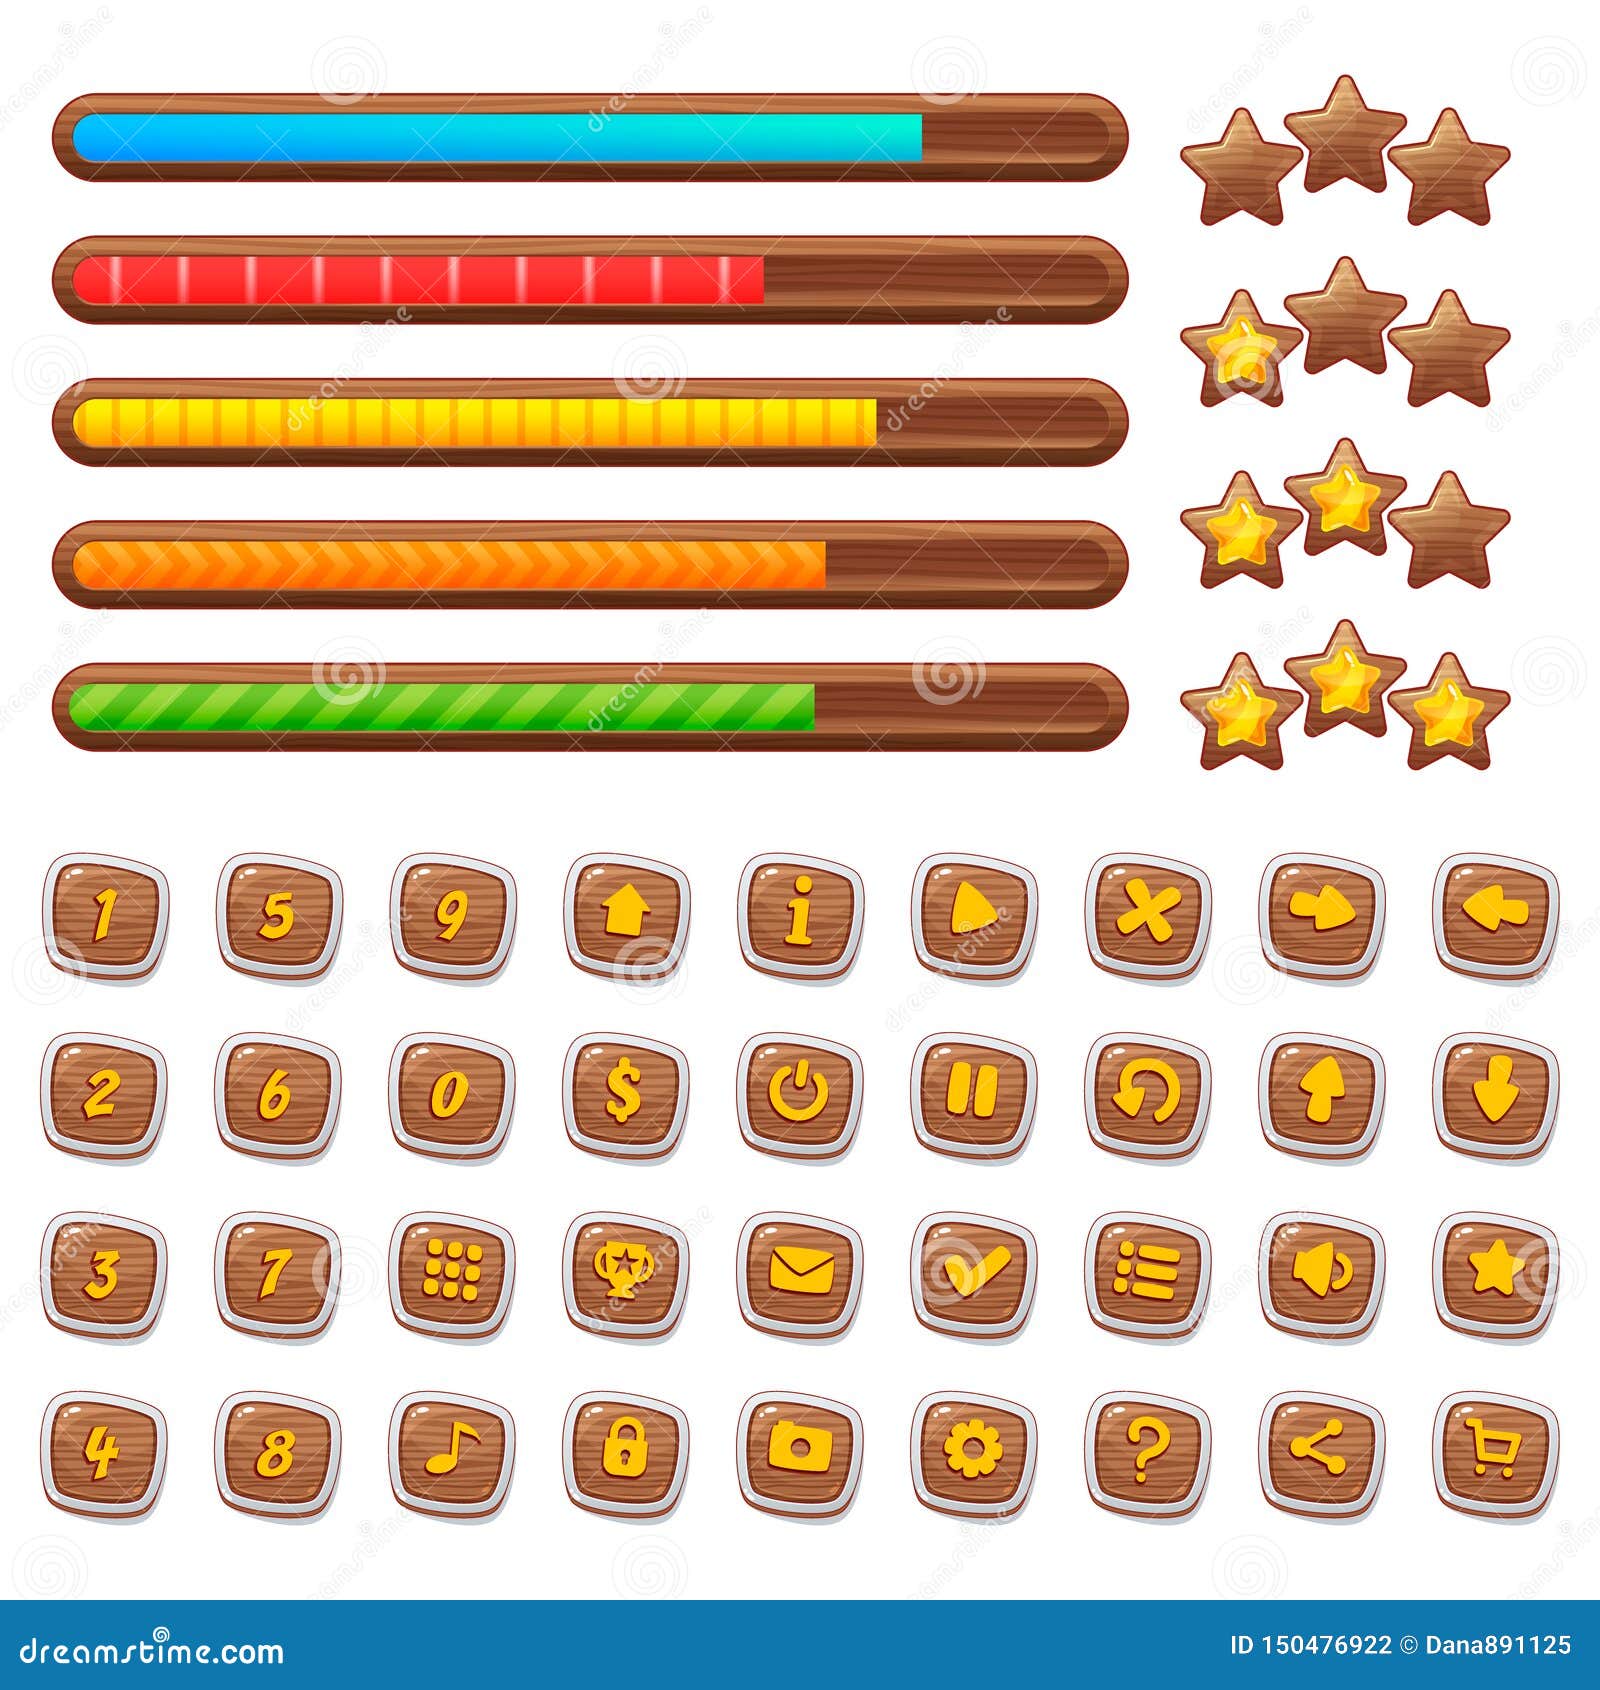 Cartoon Wooden Game Assets, Simple Kit for Game Ui Development, Vector Gui  Elements. Stock Vector - Illustration of casual, achievement: 150476922